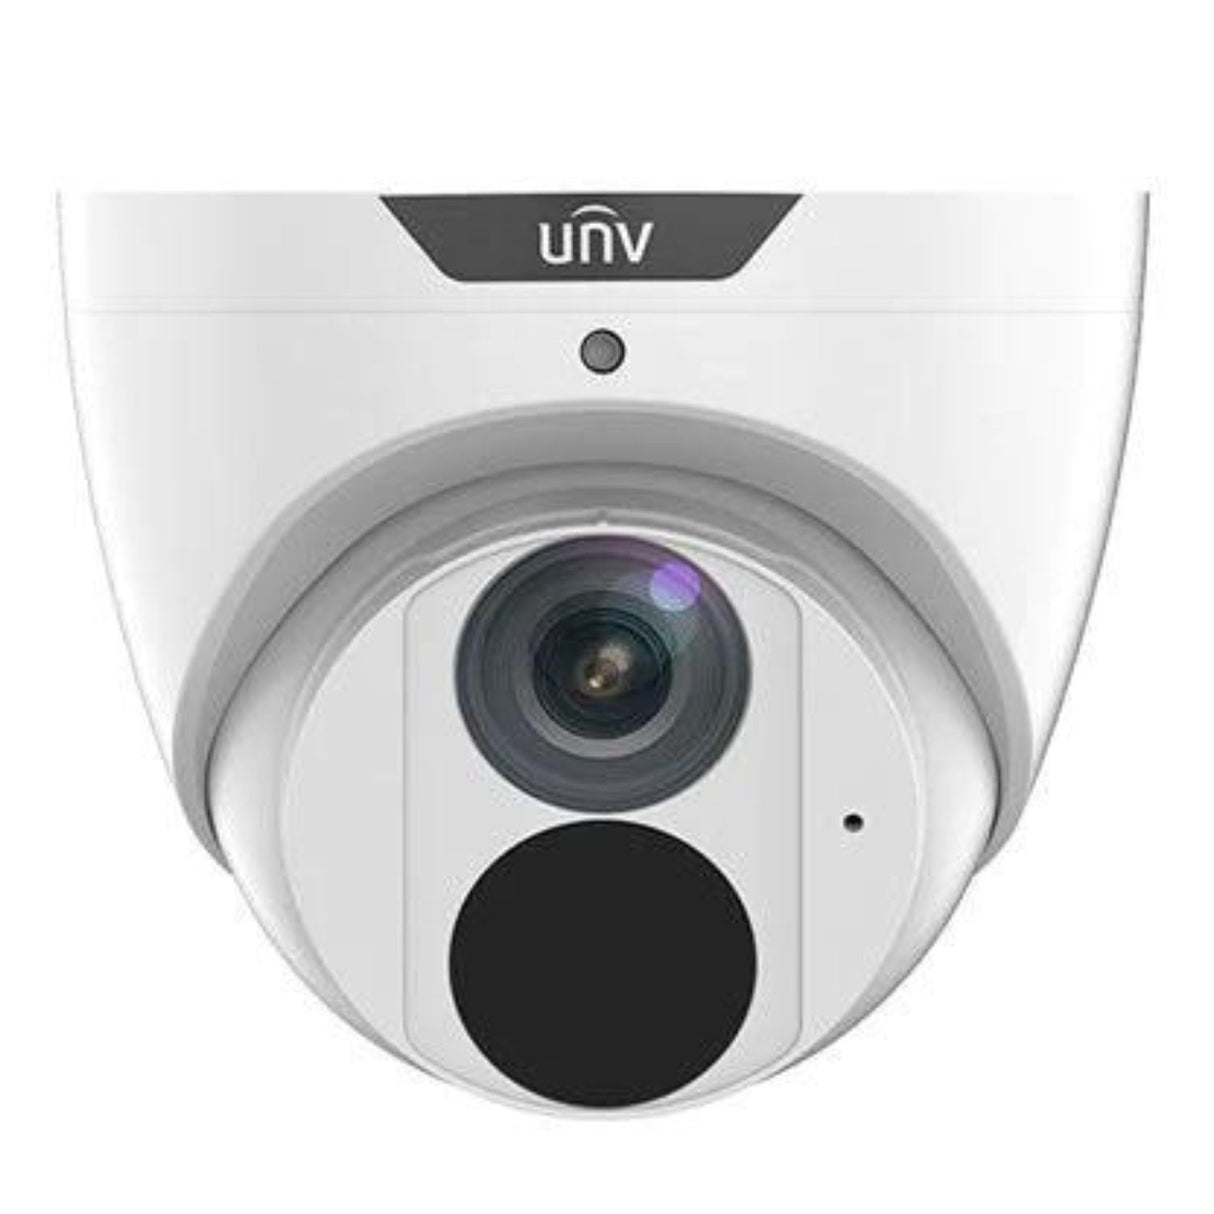 Uniview LightHunter Security System: 4x 8MP Turret Cams, 4CH 4K NVR + HDD